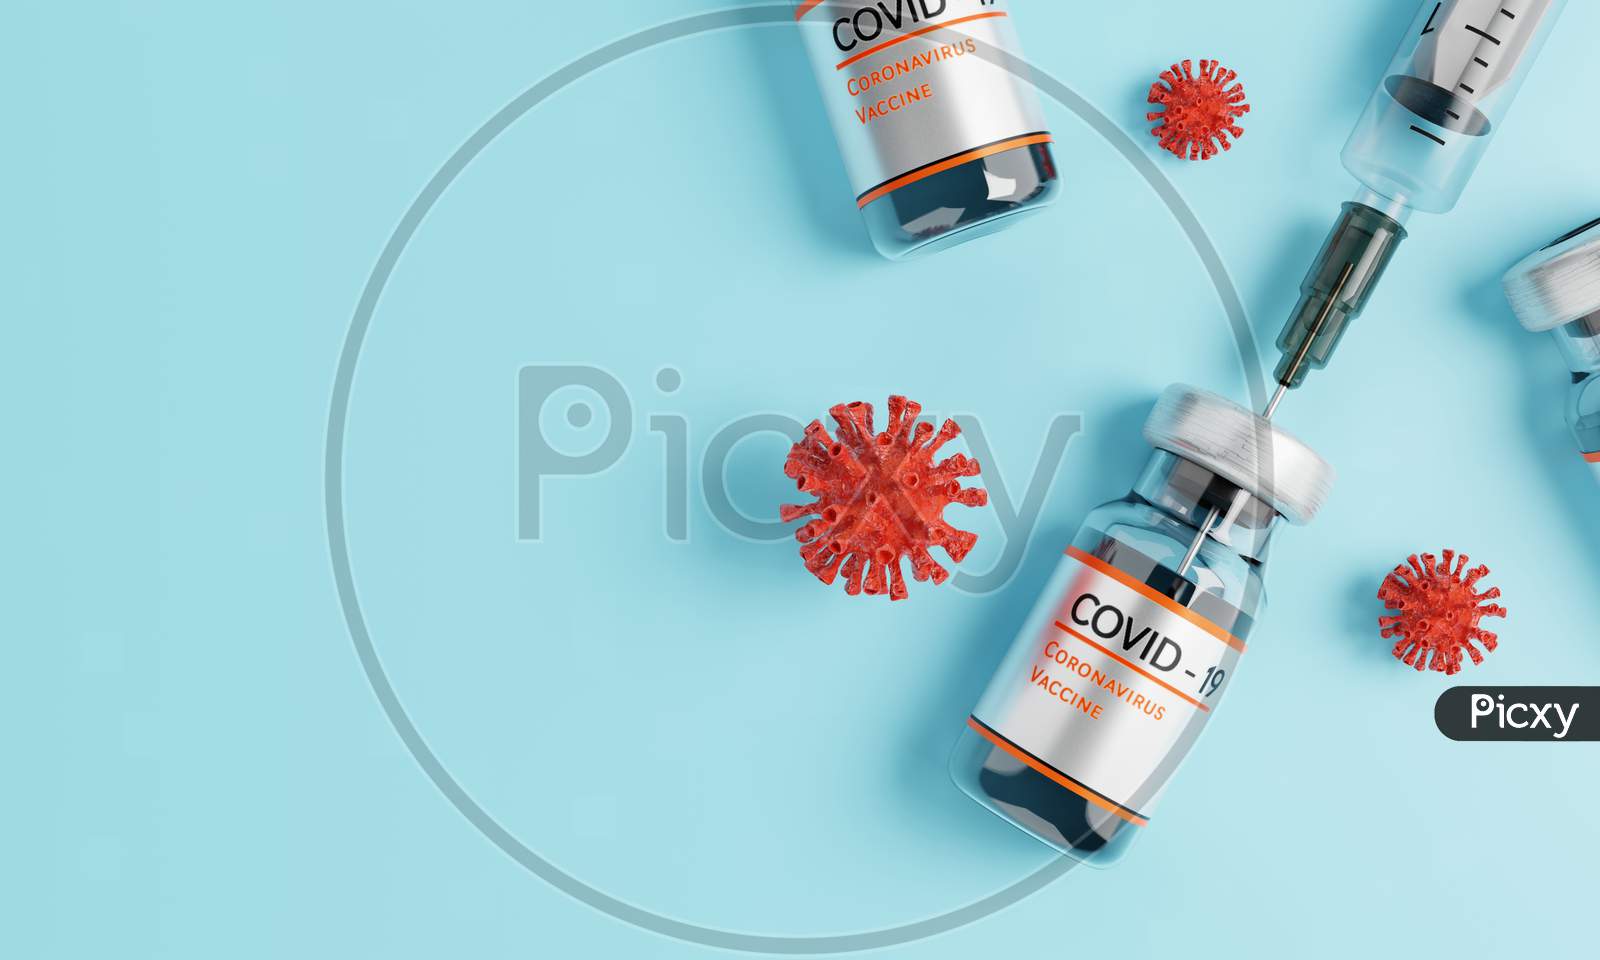 Coronavirus Vaccine Bottle With Injection Syringe And Virus On Blue Background. Health And Medical Concept. 3D Illustration Rendering Graphic Design